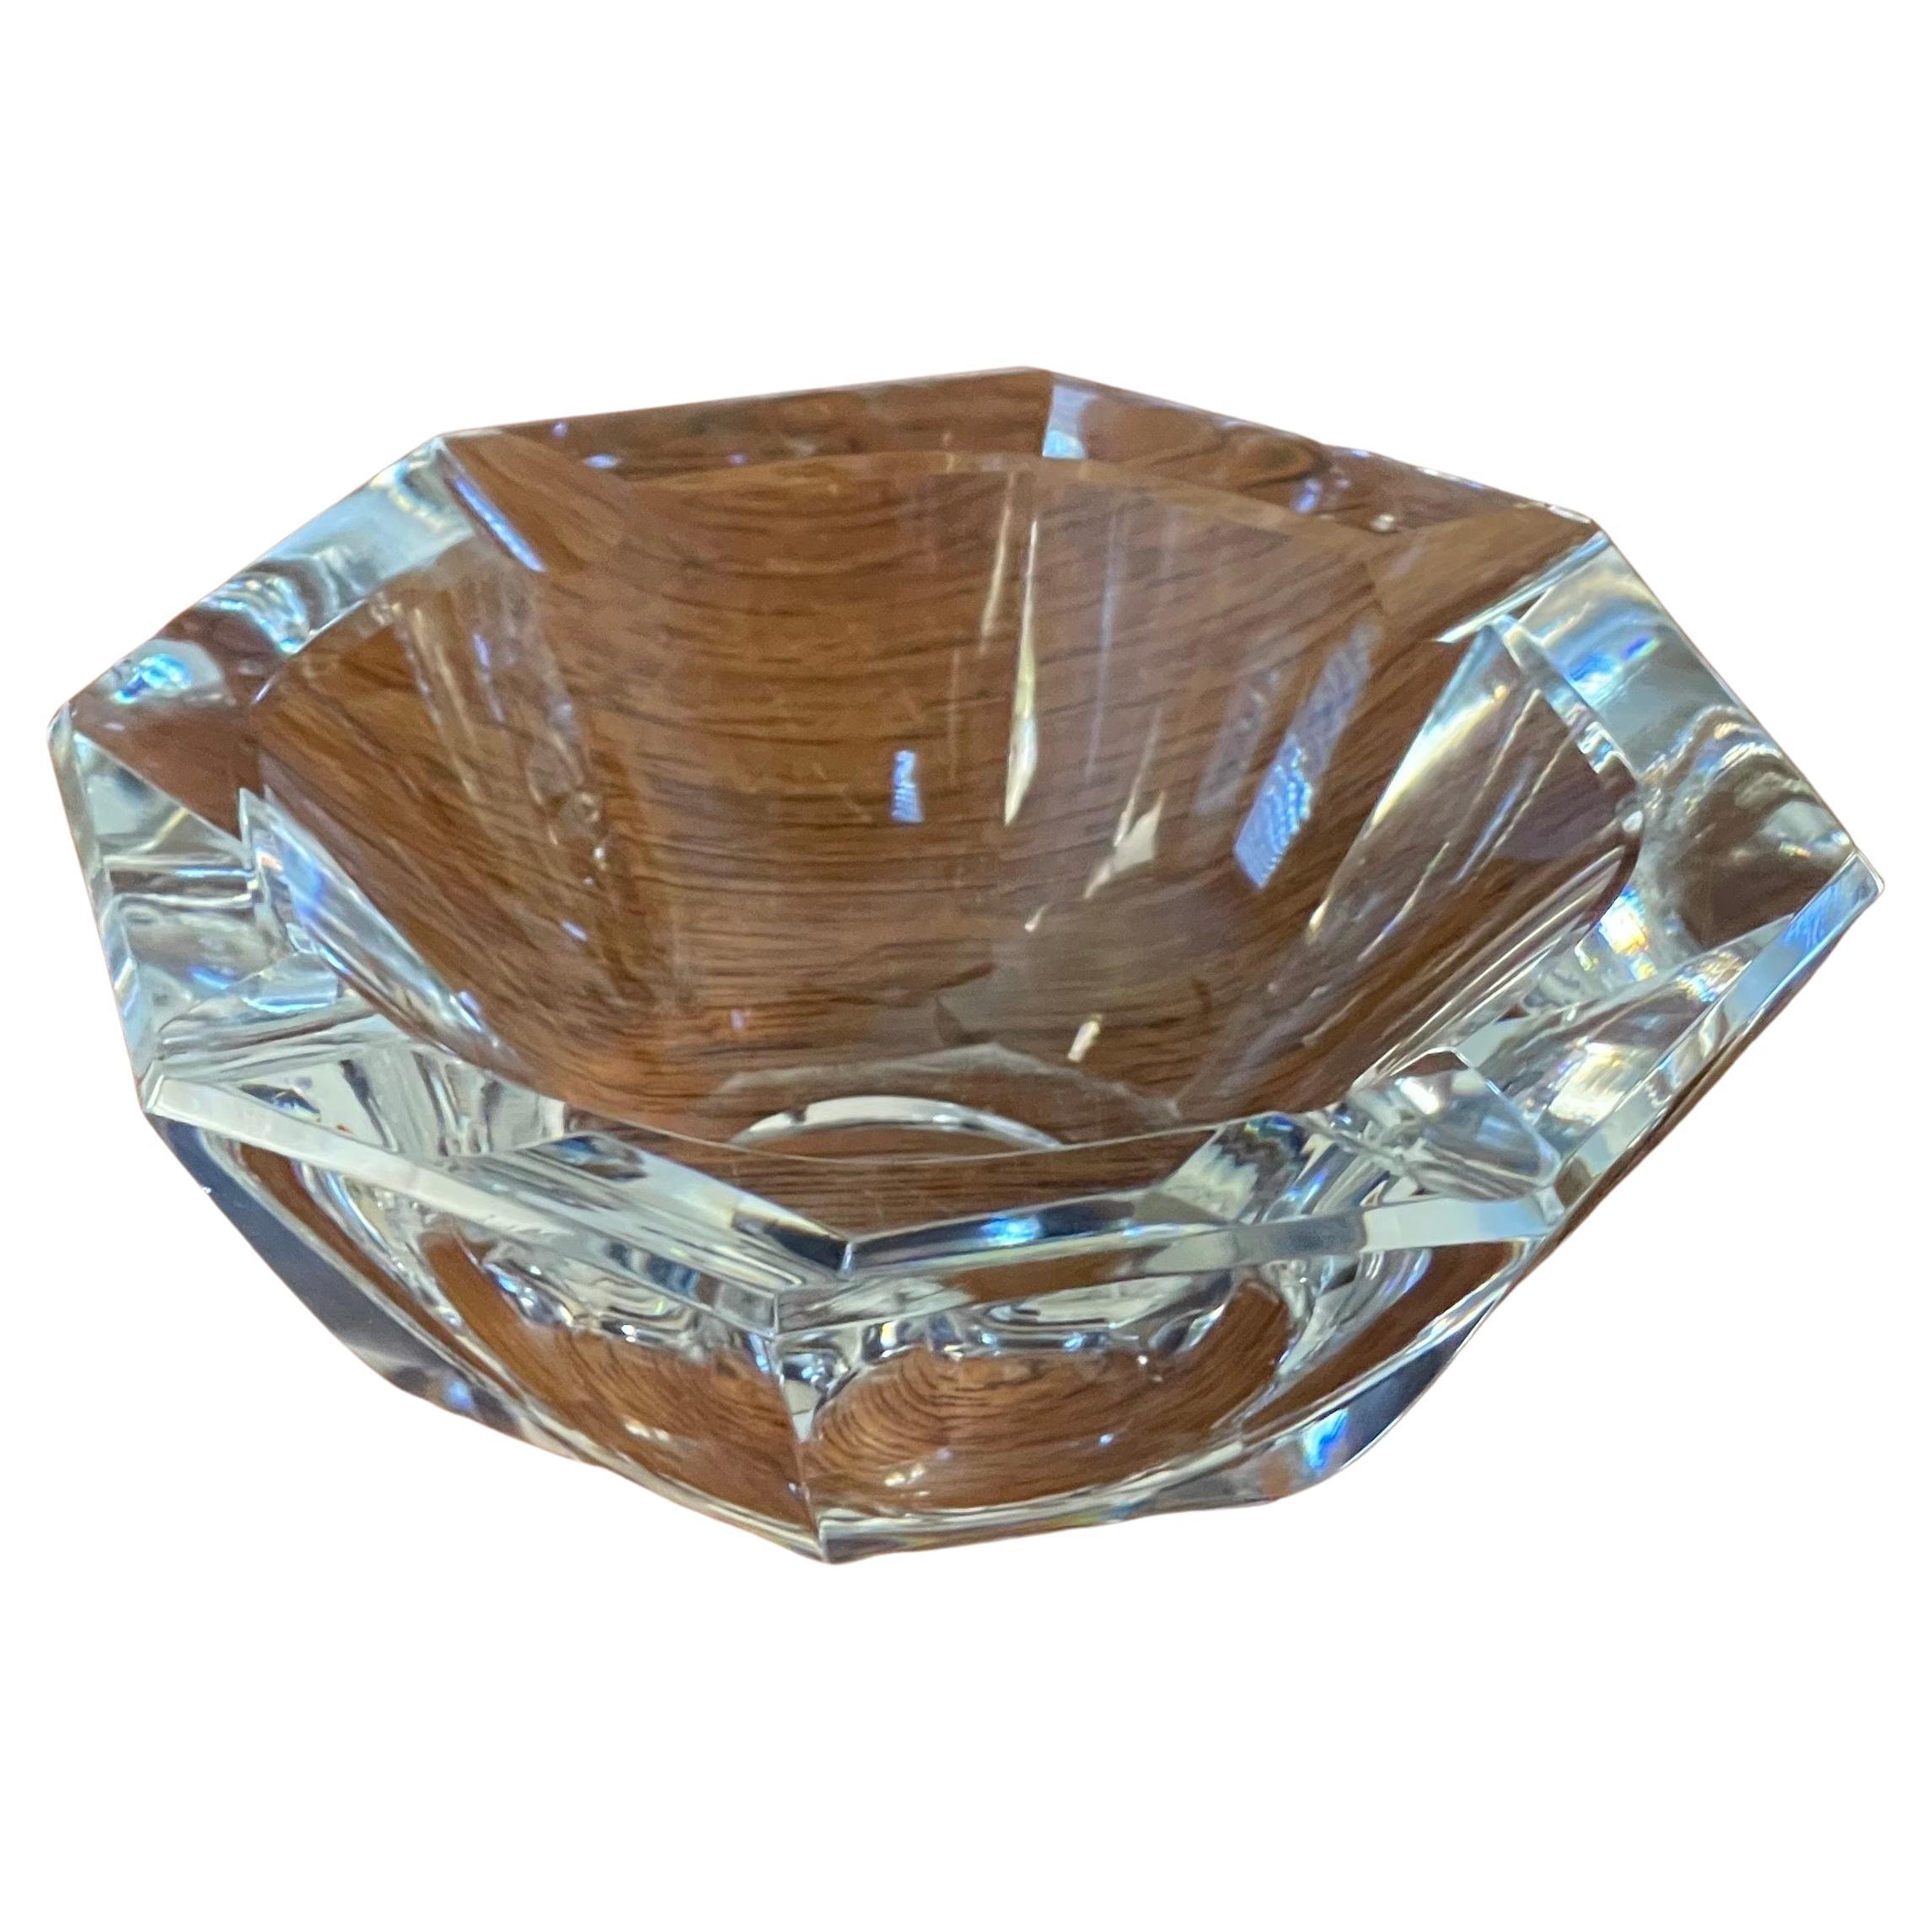 A very nice small crystal octagon shaped ashtray by Baccarat, circa 1990s. The piece is in excellent condition with no visible imperfections and has great clarity. Signed on the underside, the piece measures 5